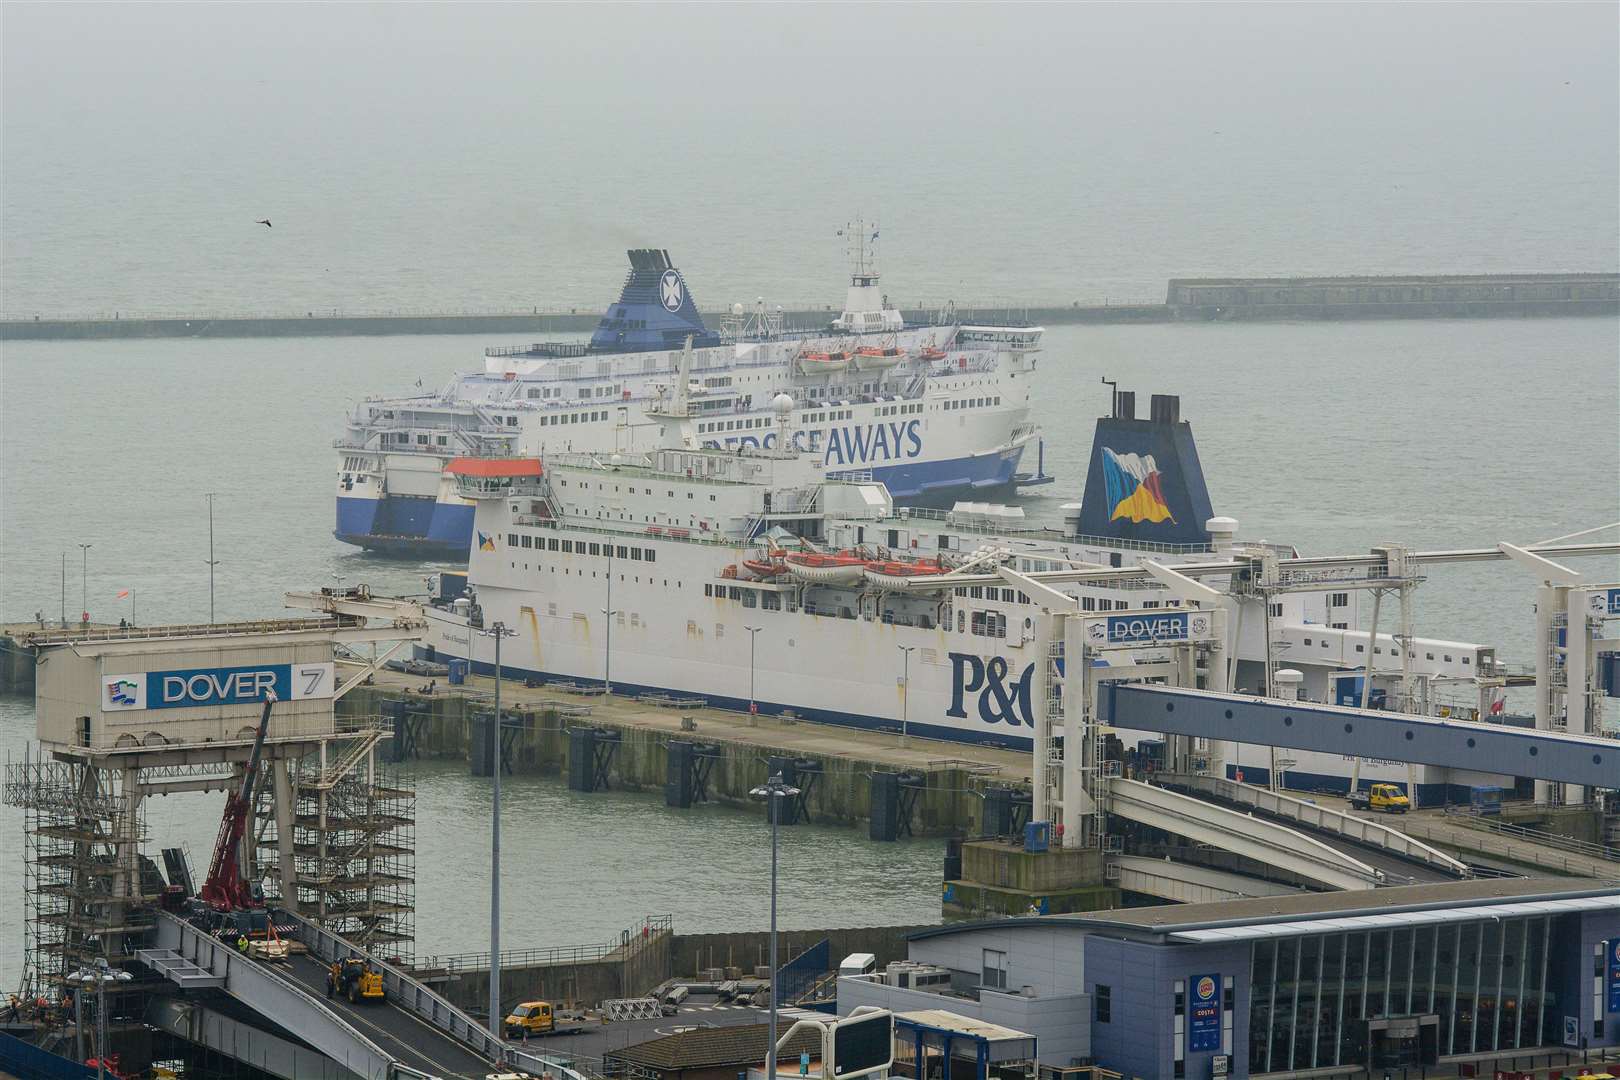 The Port of Dover